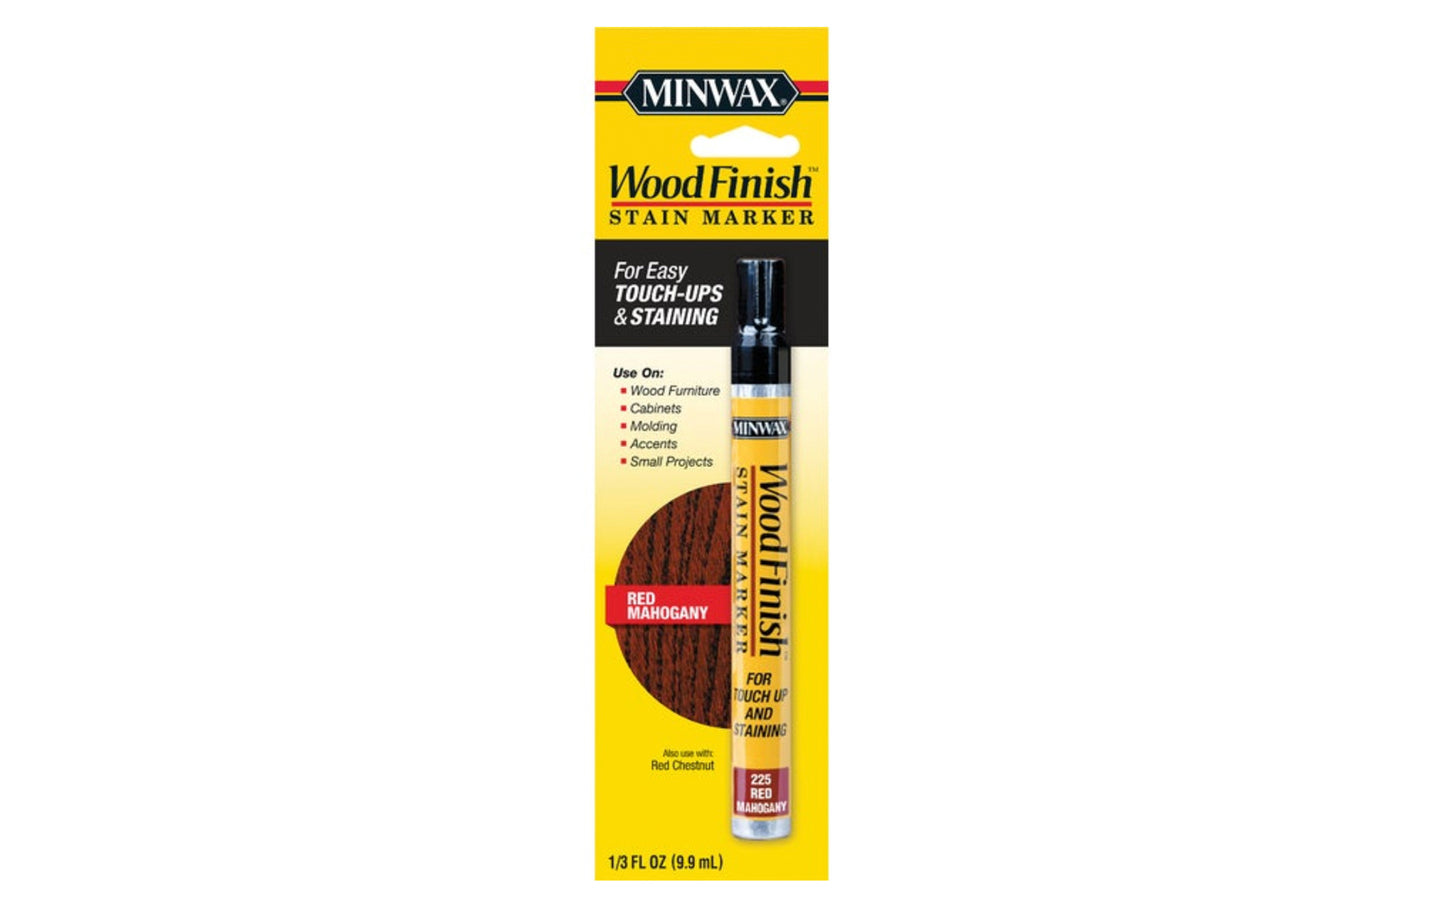 Minwax Stain Marker - Red Mahogany. Color-matched to Minwax stains: Red Chestnut finishes. Use on furniture, cabinets, wood molding, accents, small projects, other finished wood surfaces. Quick & easy touch-ups & staining. Minwax touch up stain pen. Touch-up stain marker.